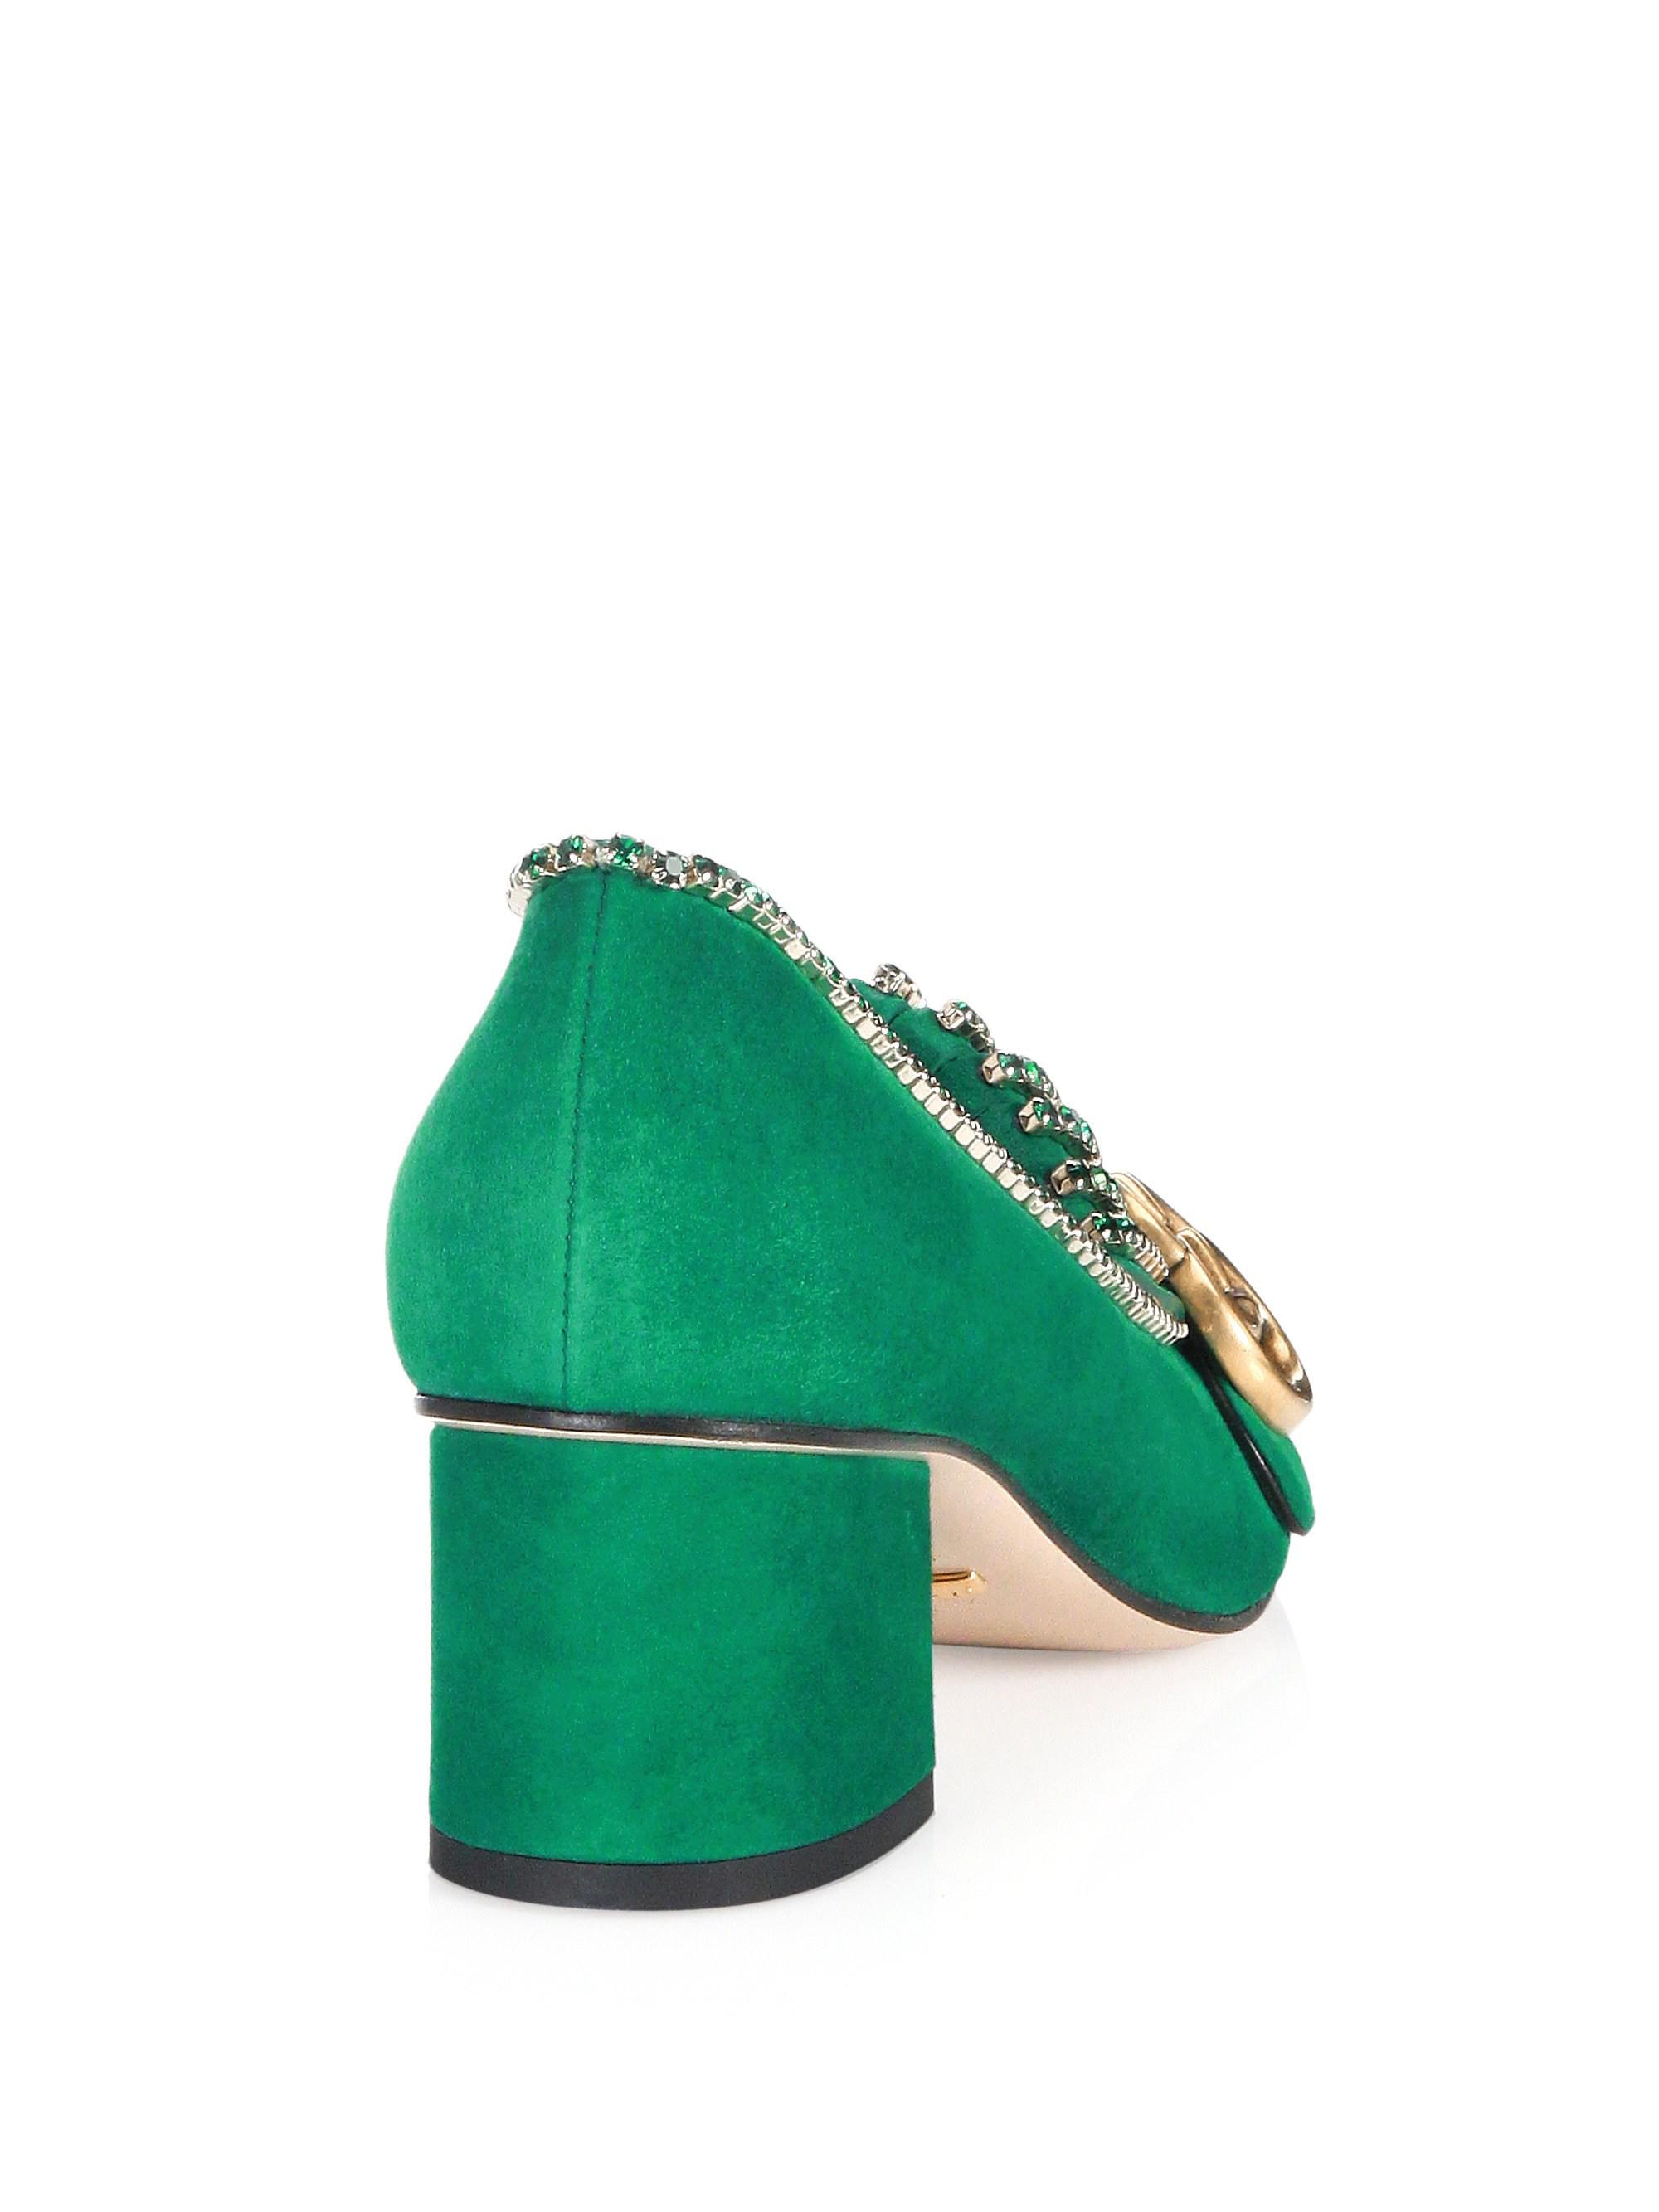 Gucci Marmont Suede Mid-heel Pumps With Crystals in Emerald (Green) - Lyst